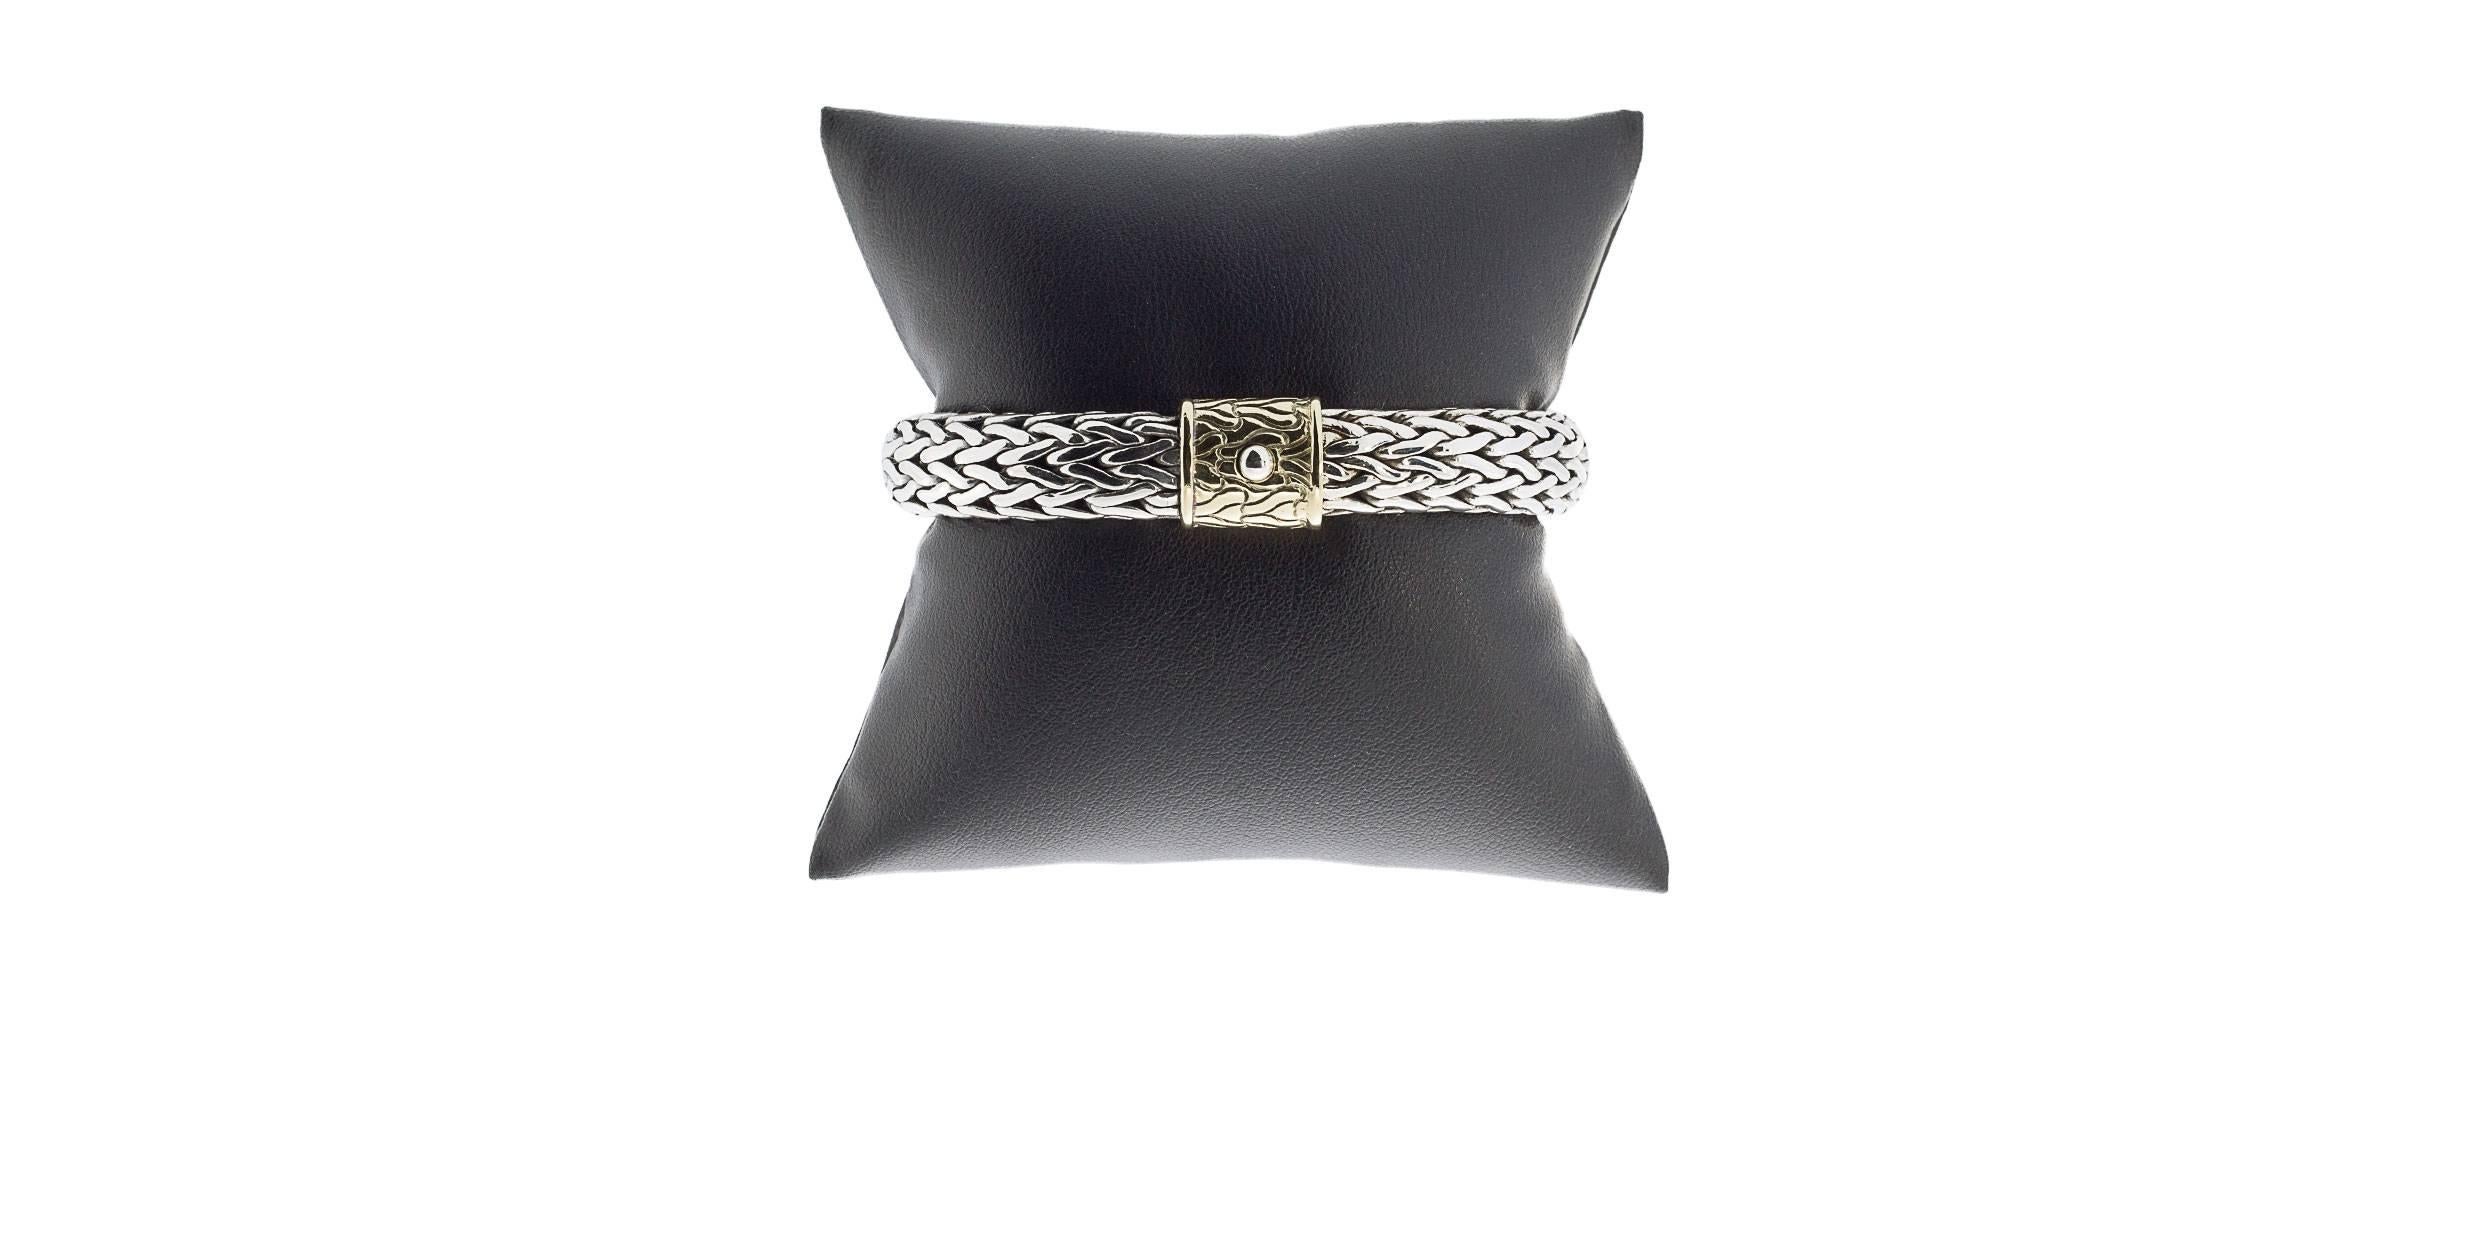 Each piece of John Hardy jewelry has been hand crafted in Bali since 1975. John Hardy is dedicated to creating timeless one-of-a-kind pieces that are brilliantly alive. This beautiful bracelet features a woven design in sterling silver with an